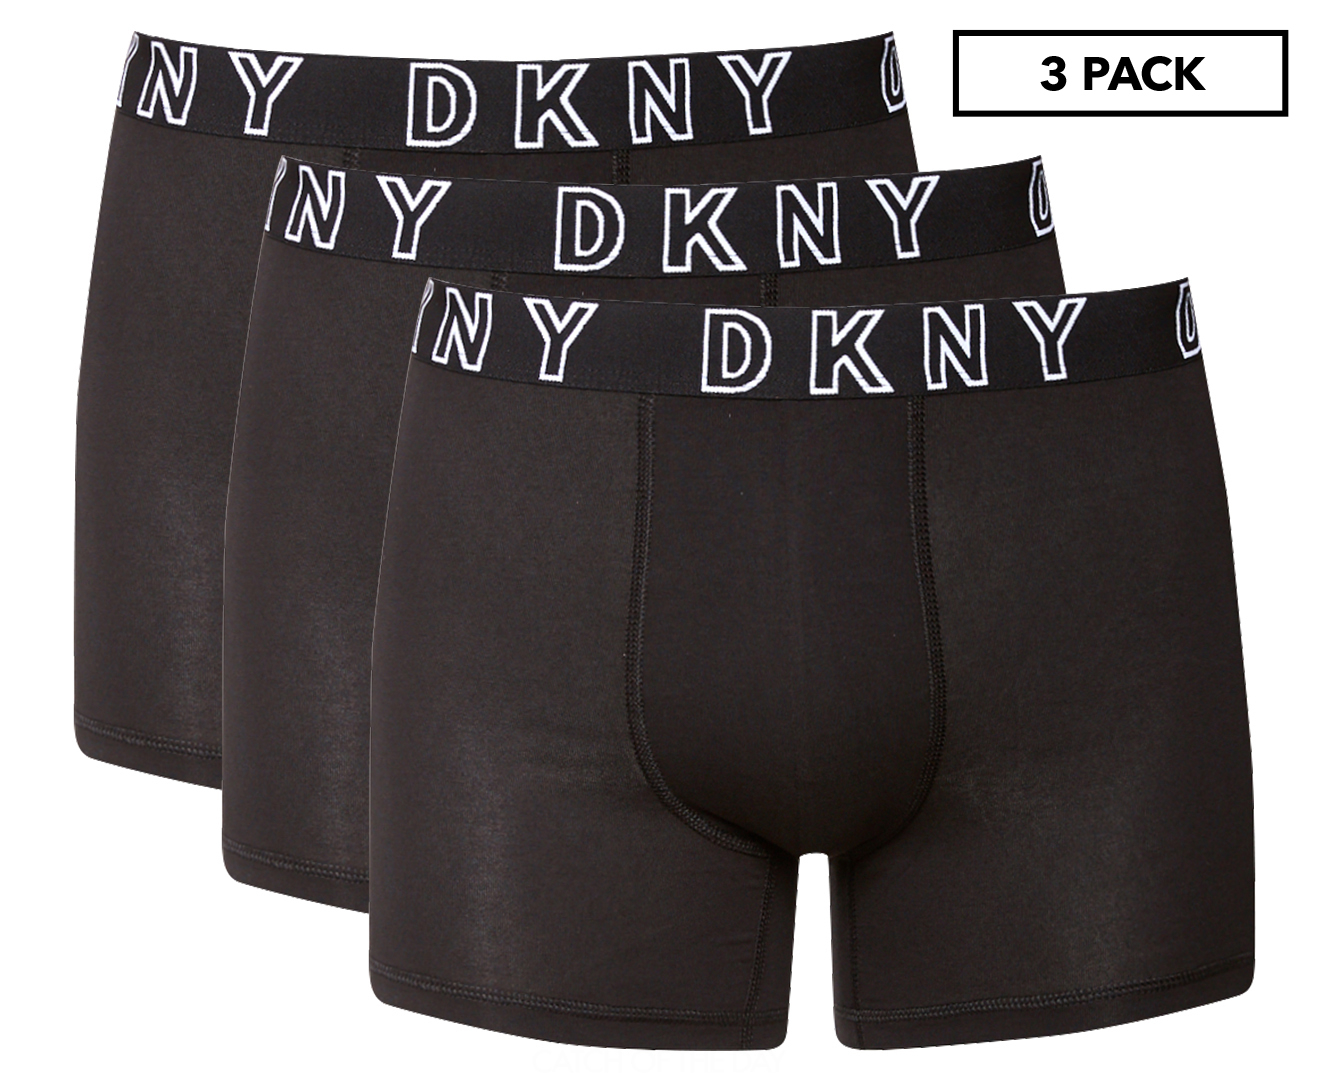 DKNY Underwear Mens 3 pack Trunks With Stretch Black